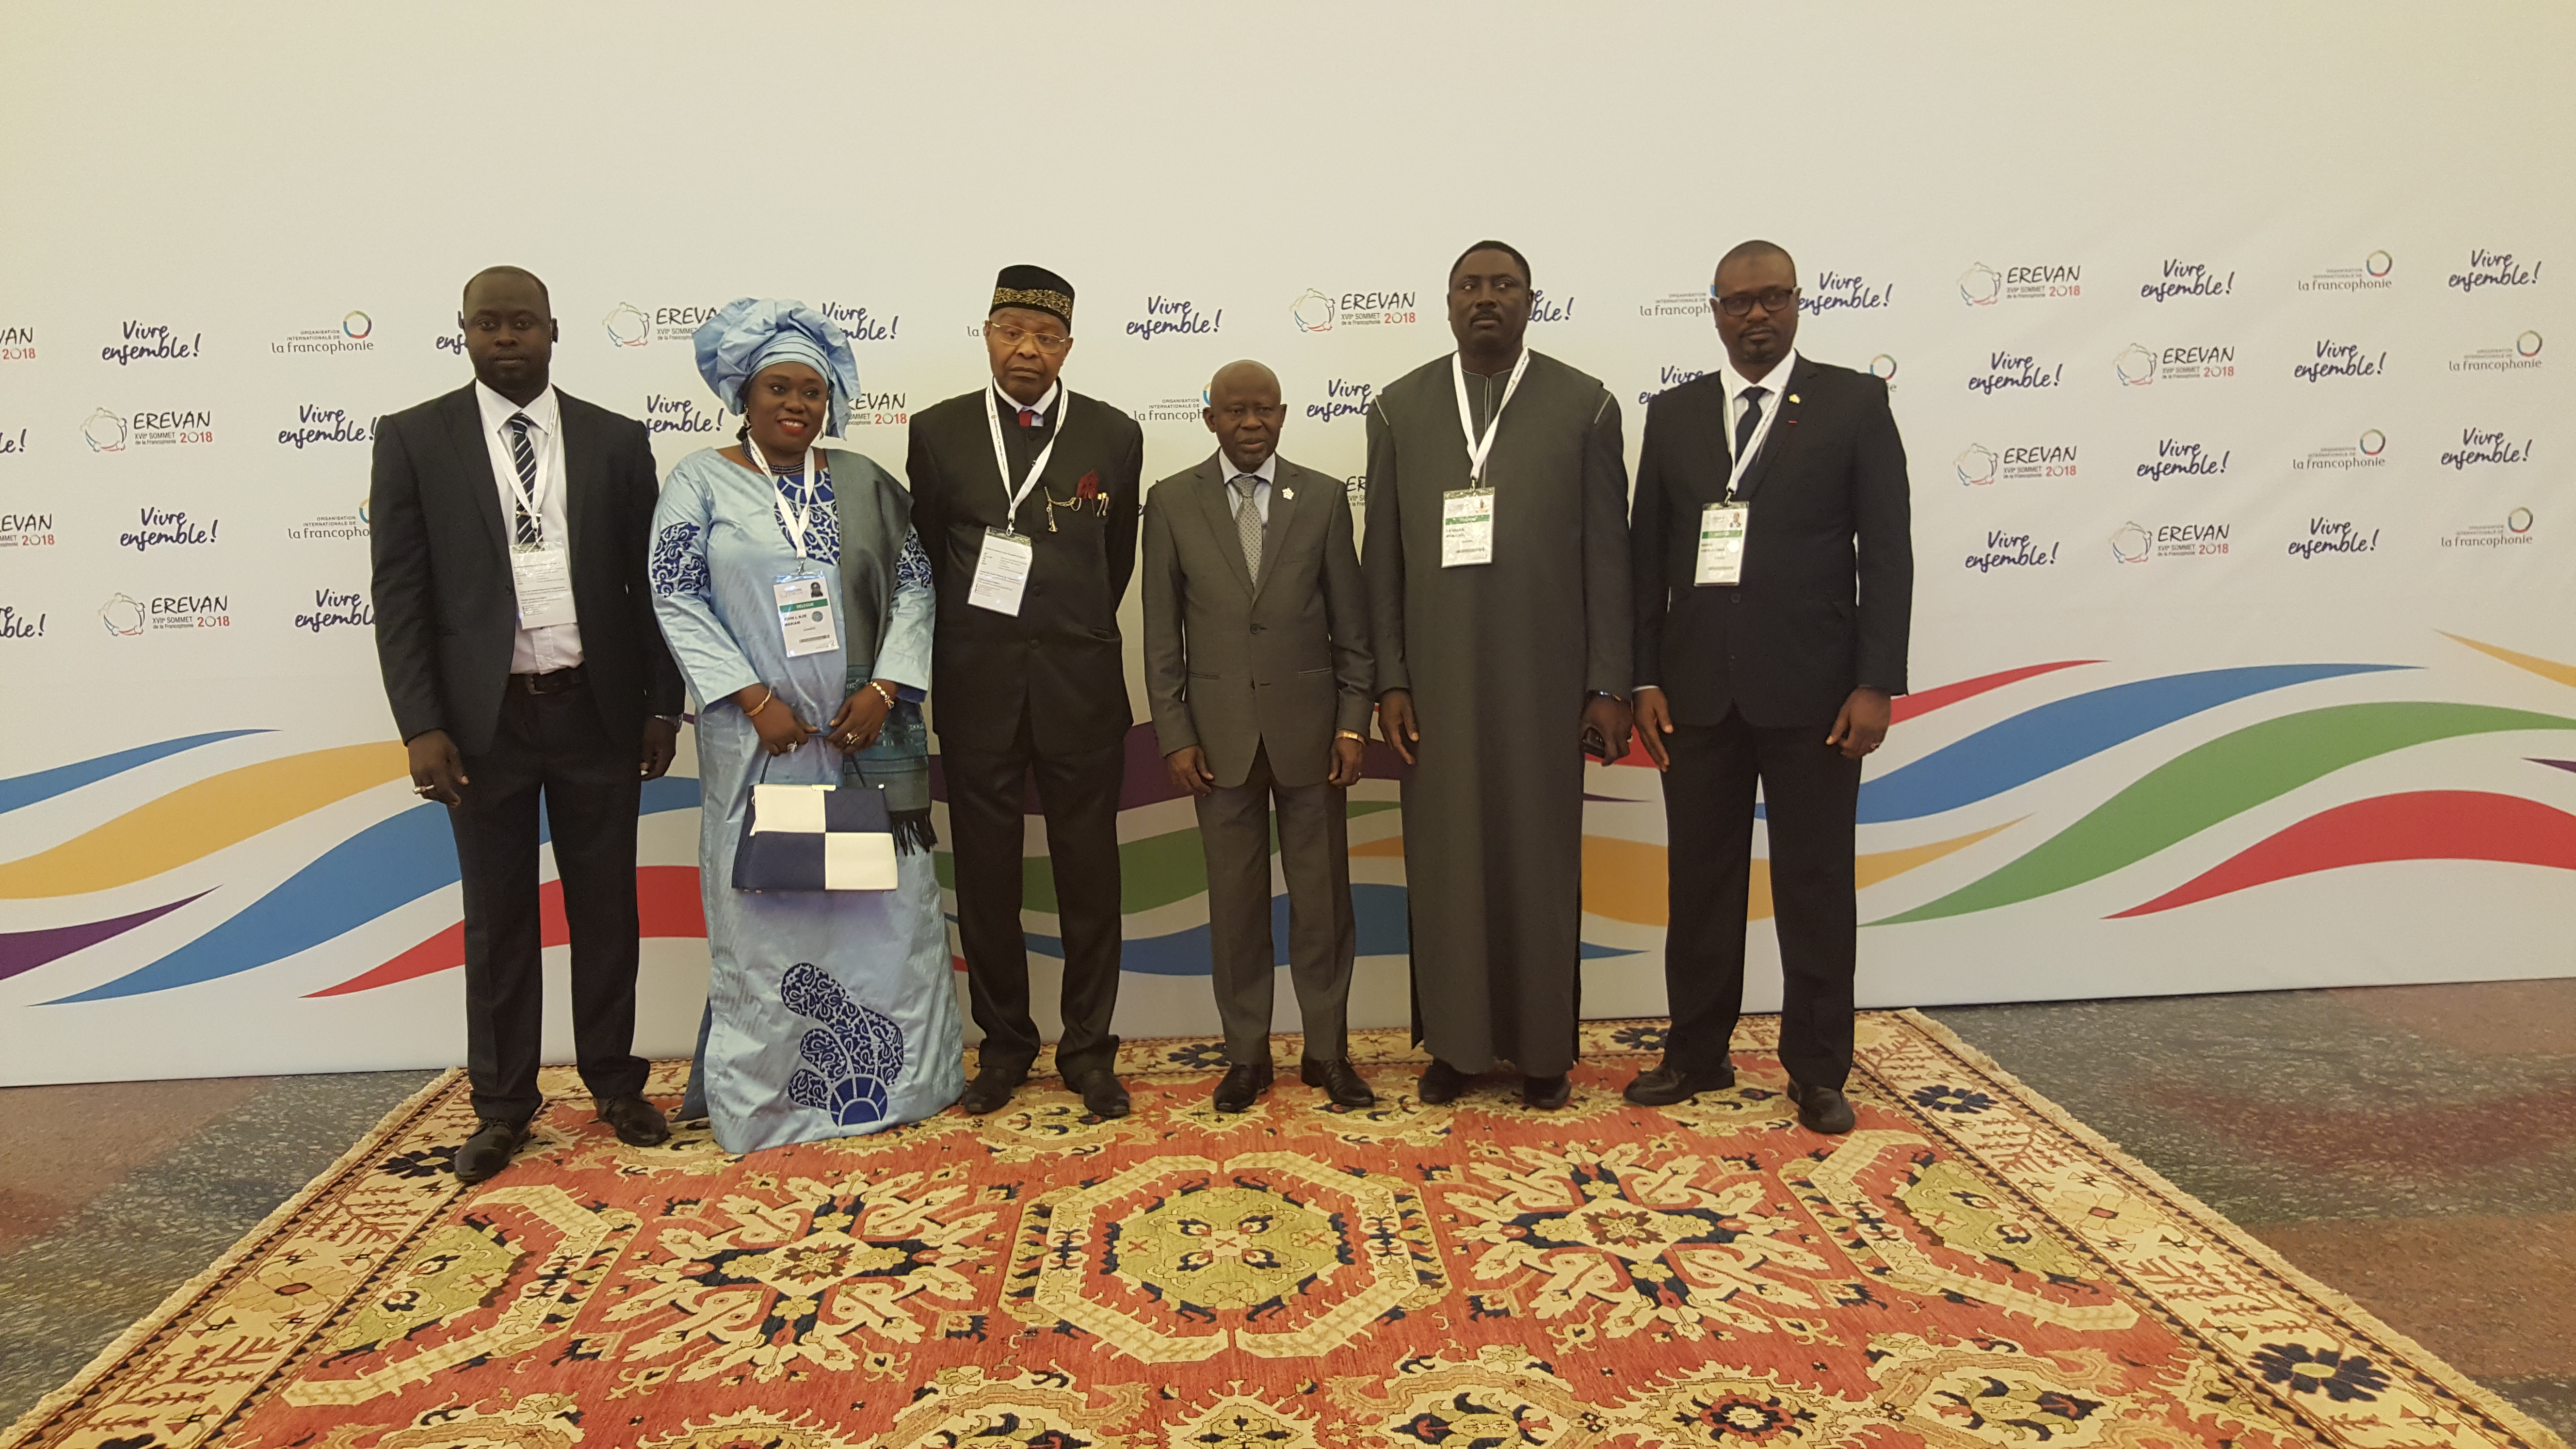 The Gambia joins the International Organization of the Francophonie